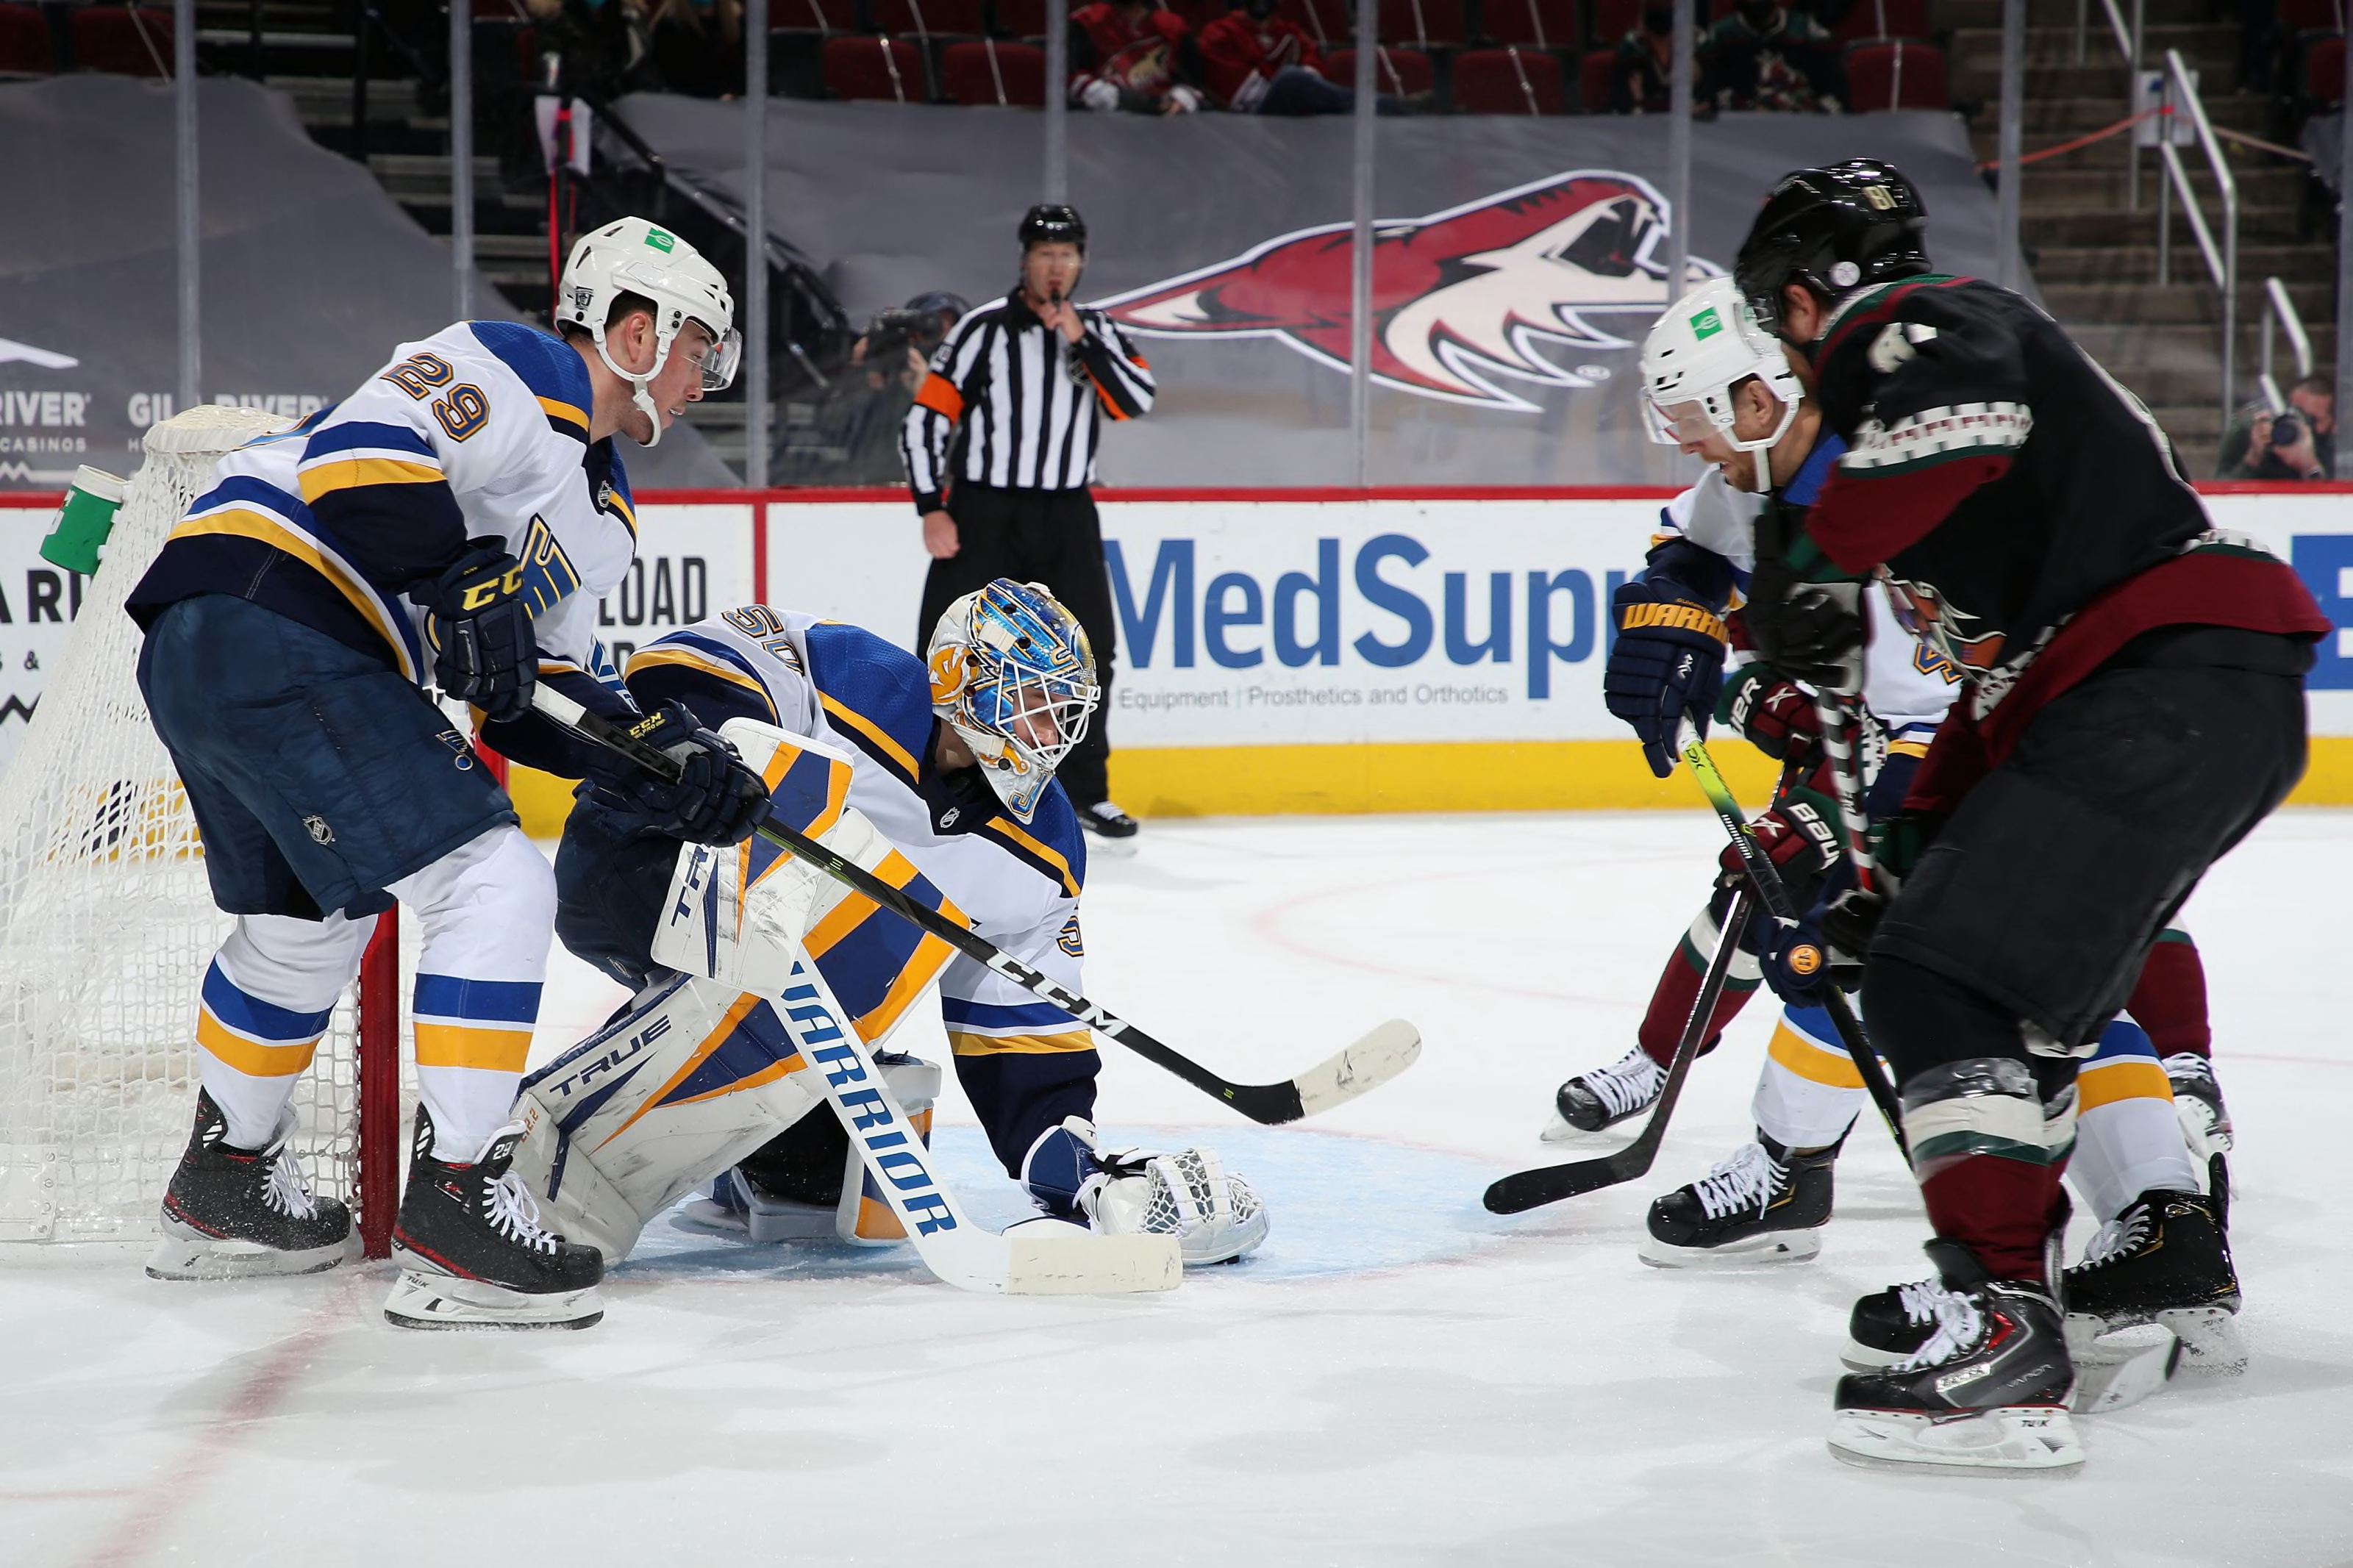 St. Louis Blues at Phoenix Coyotes: 1999 Western Quarterfinals, Game 7  (PARTIAL GAME) 